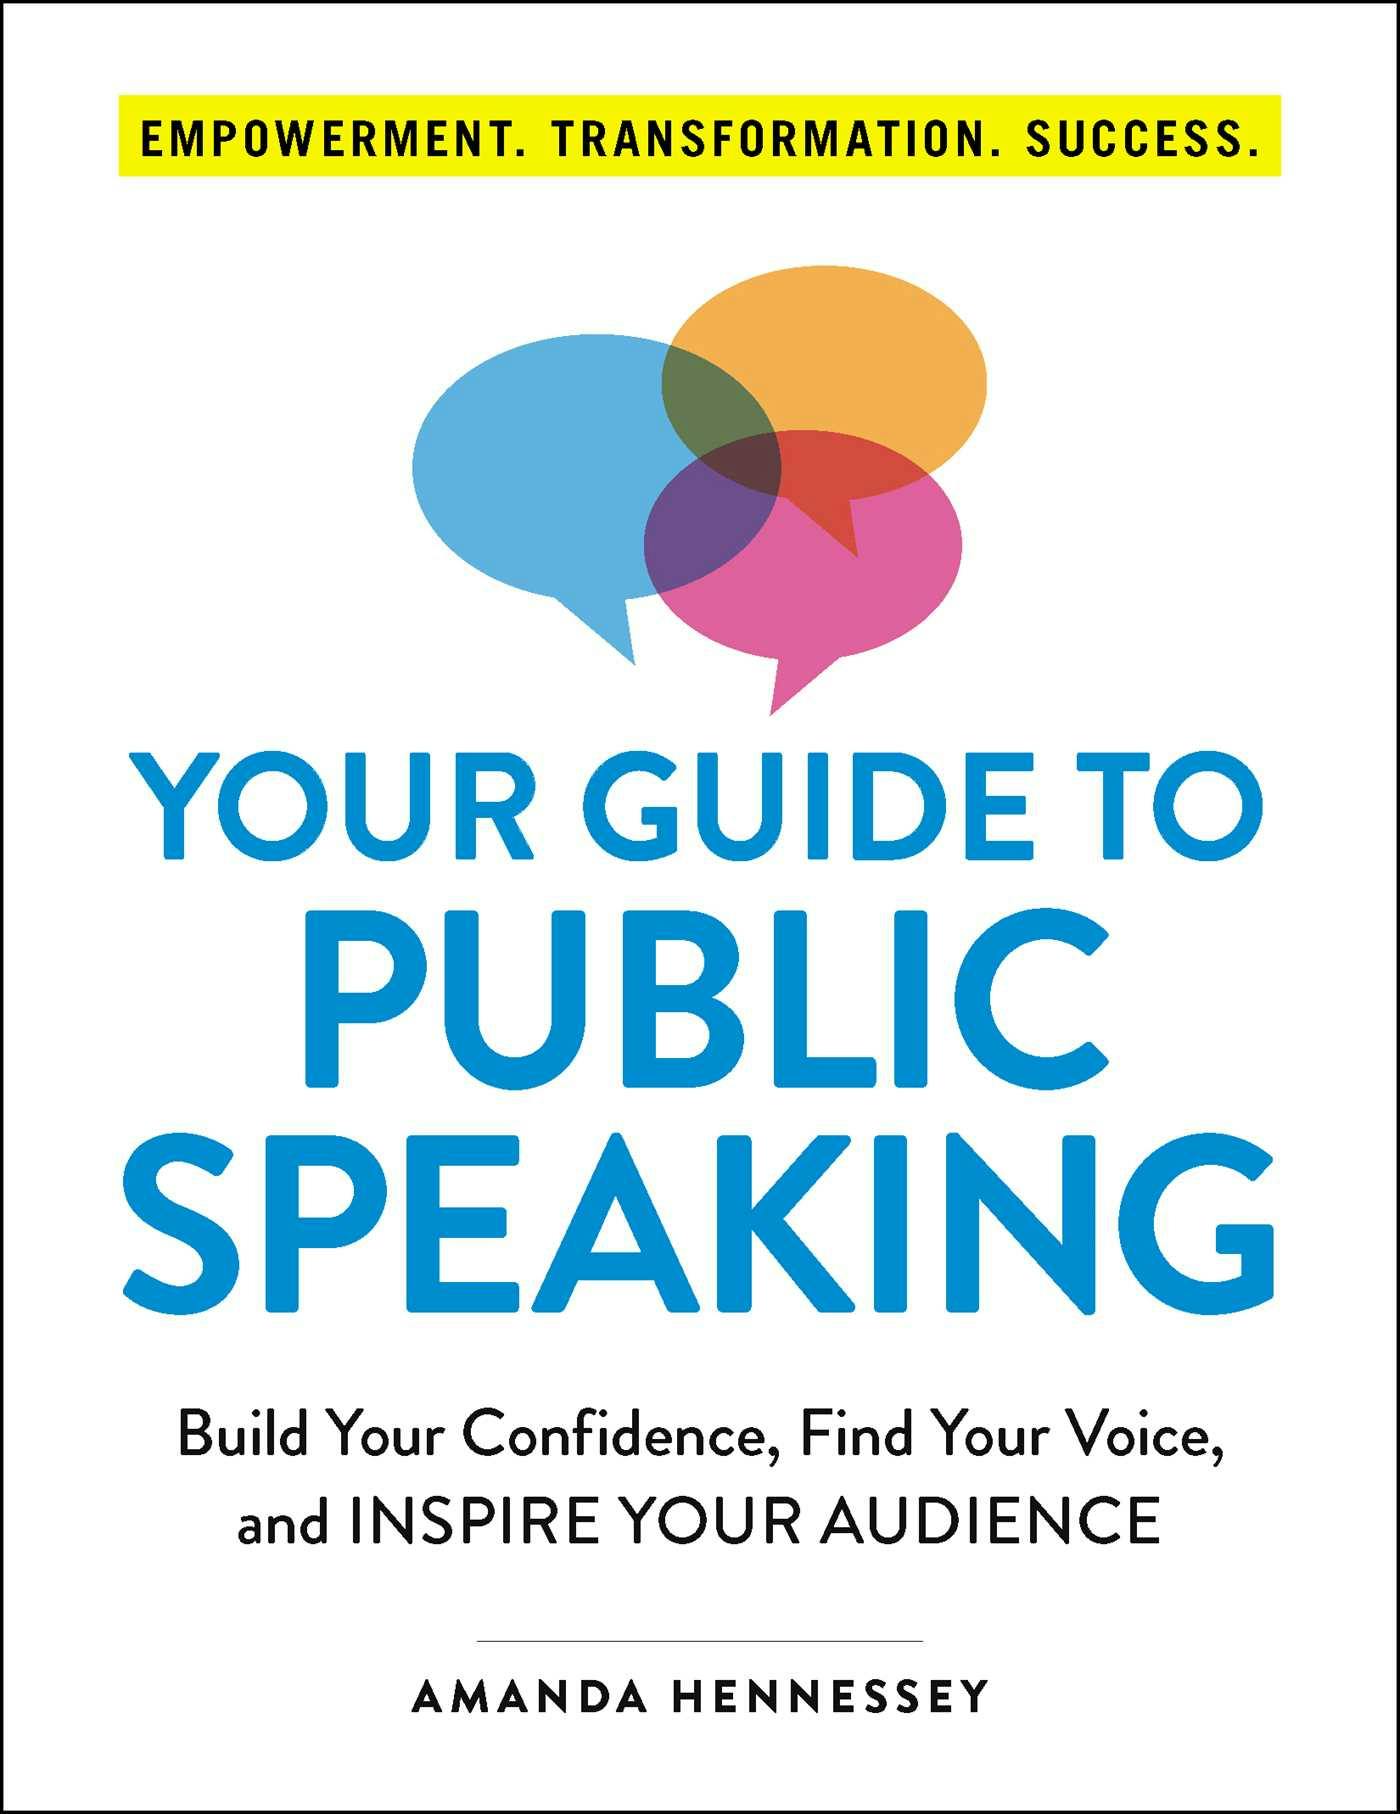 Your Guide to Public Speaking: Build Your Confidence, Find Your Voice, and Inspire Your Audience - Amanda Hennessey